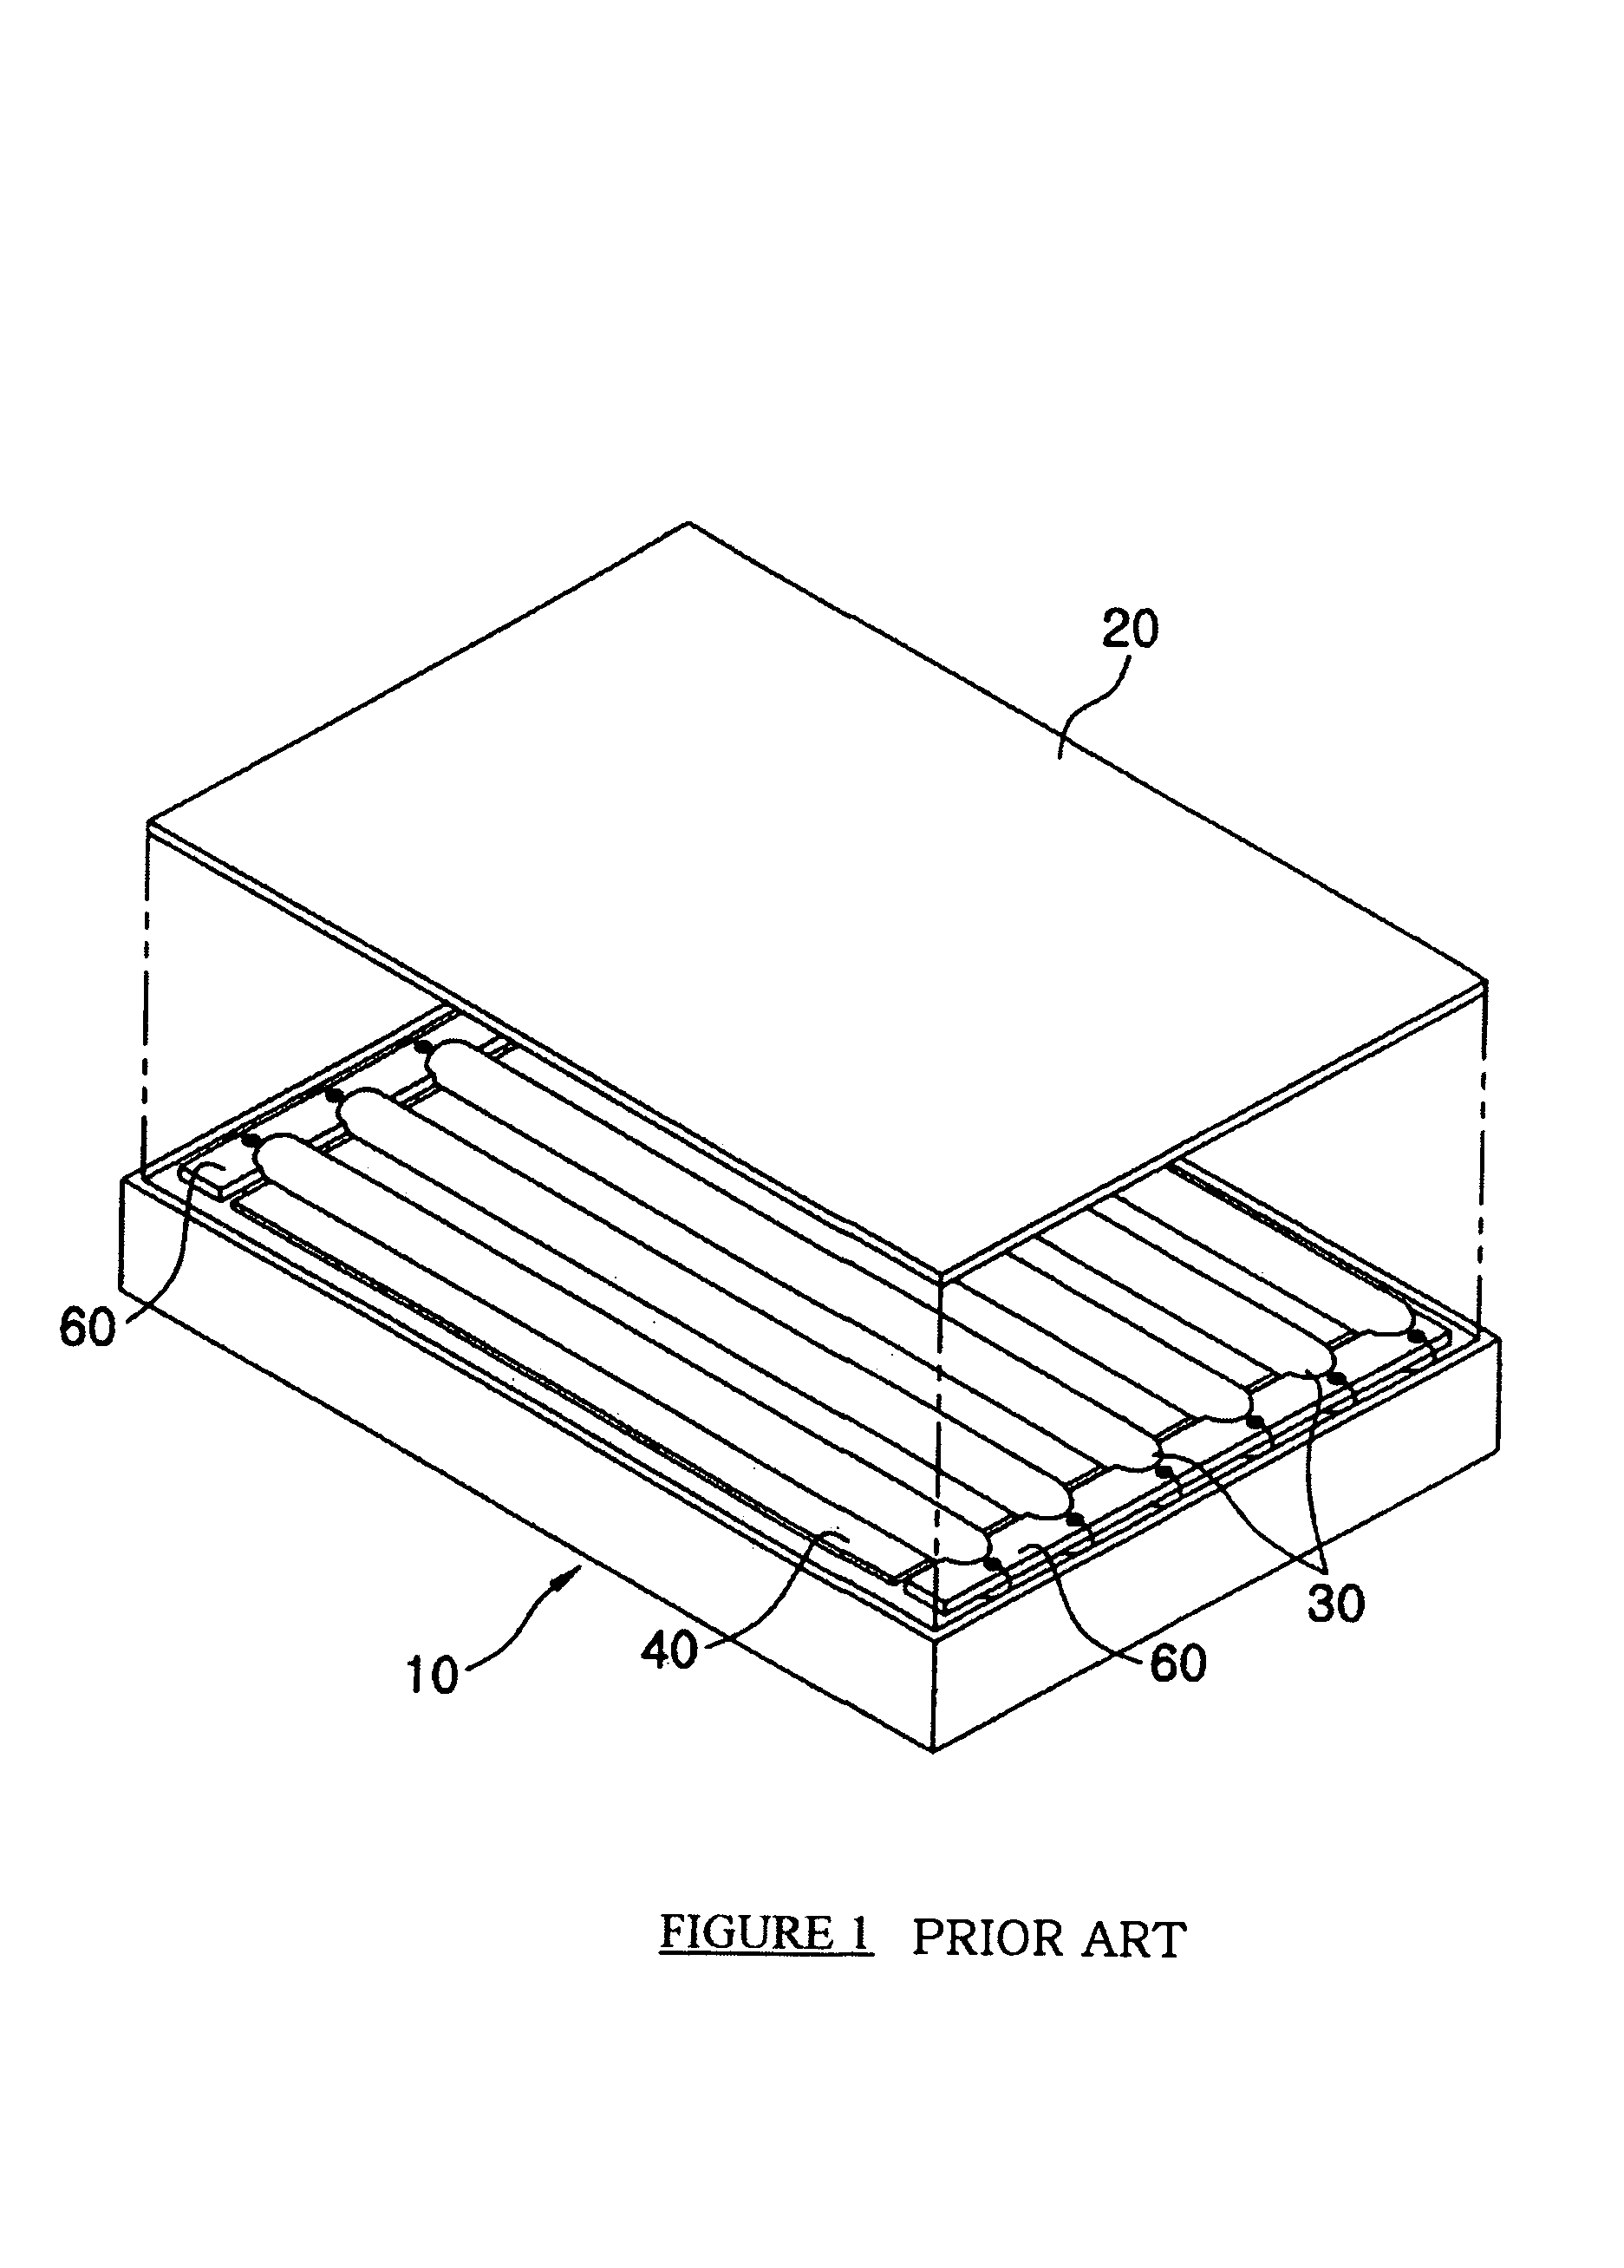 Direct-type back light device